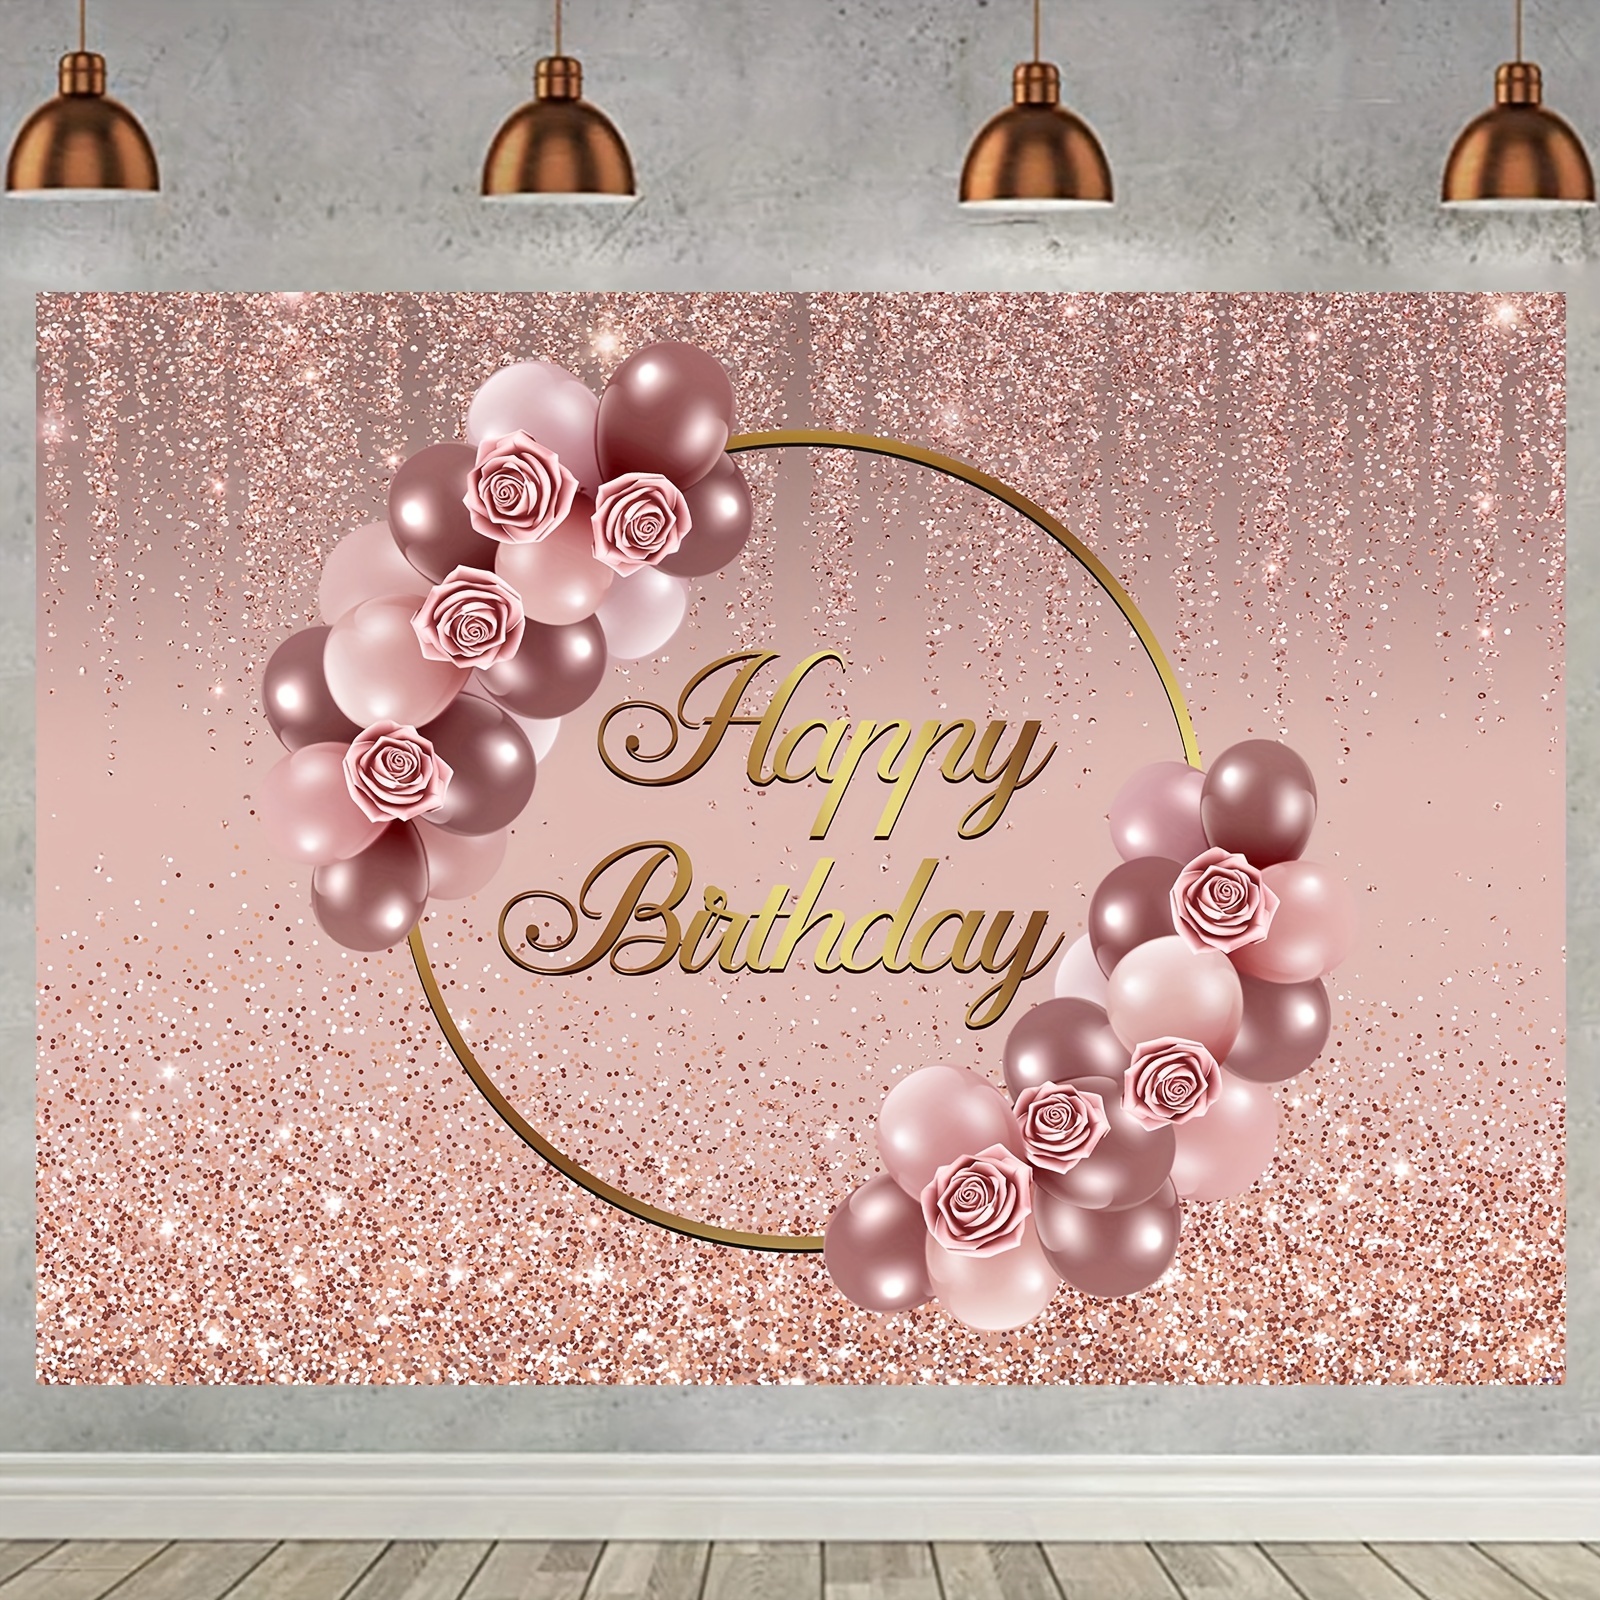 

1pc 7x5ft Rose Golden Happy Birthday Backdrop Golden Floral Balloon Rose Golden Bokeh Photography Background Women Sweet Princess Birthday Party Dessert Cake Table Decor Props Banner Decorations